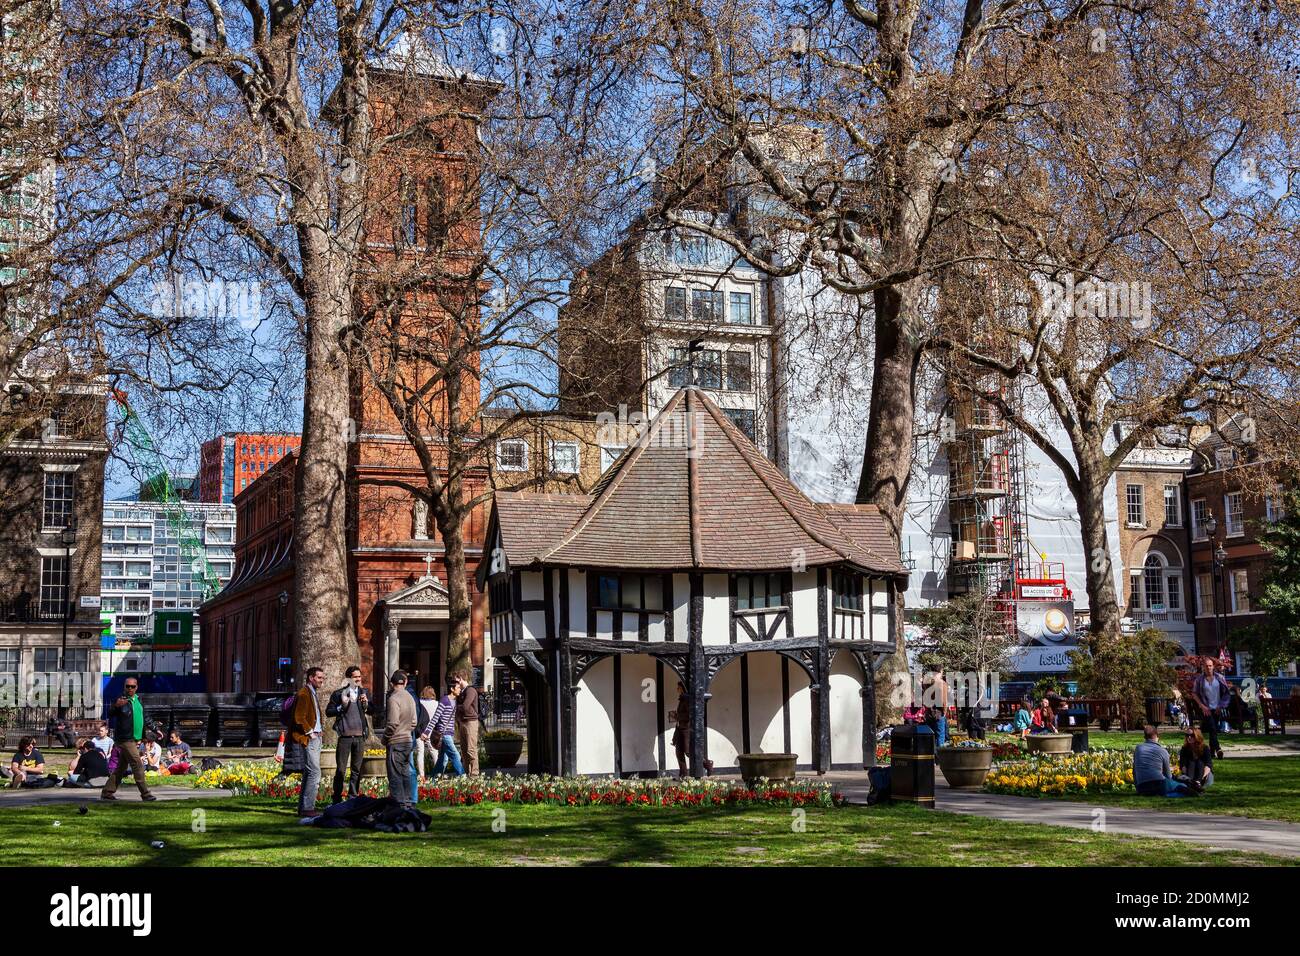 London, UK, April 1, 2012 : Soho Square public park market cross an old fashioned mock architecture building which is a popular open space travel dest Stock Photo